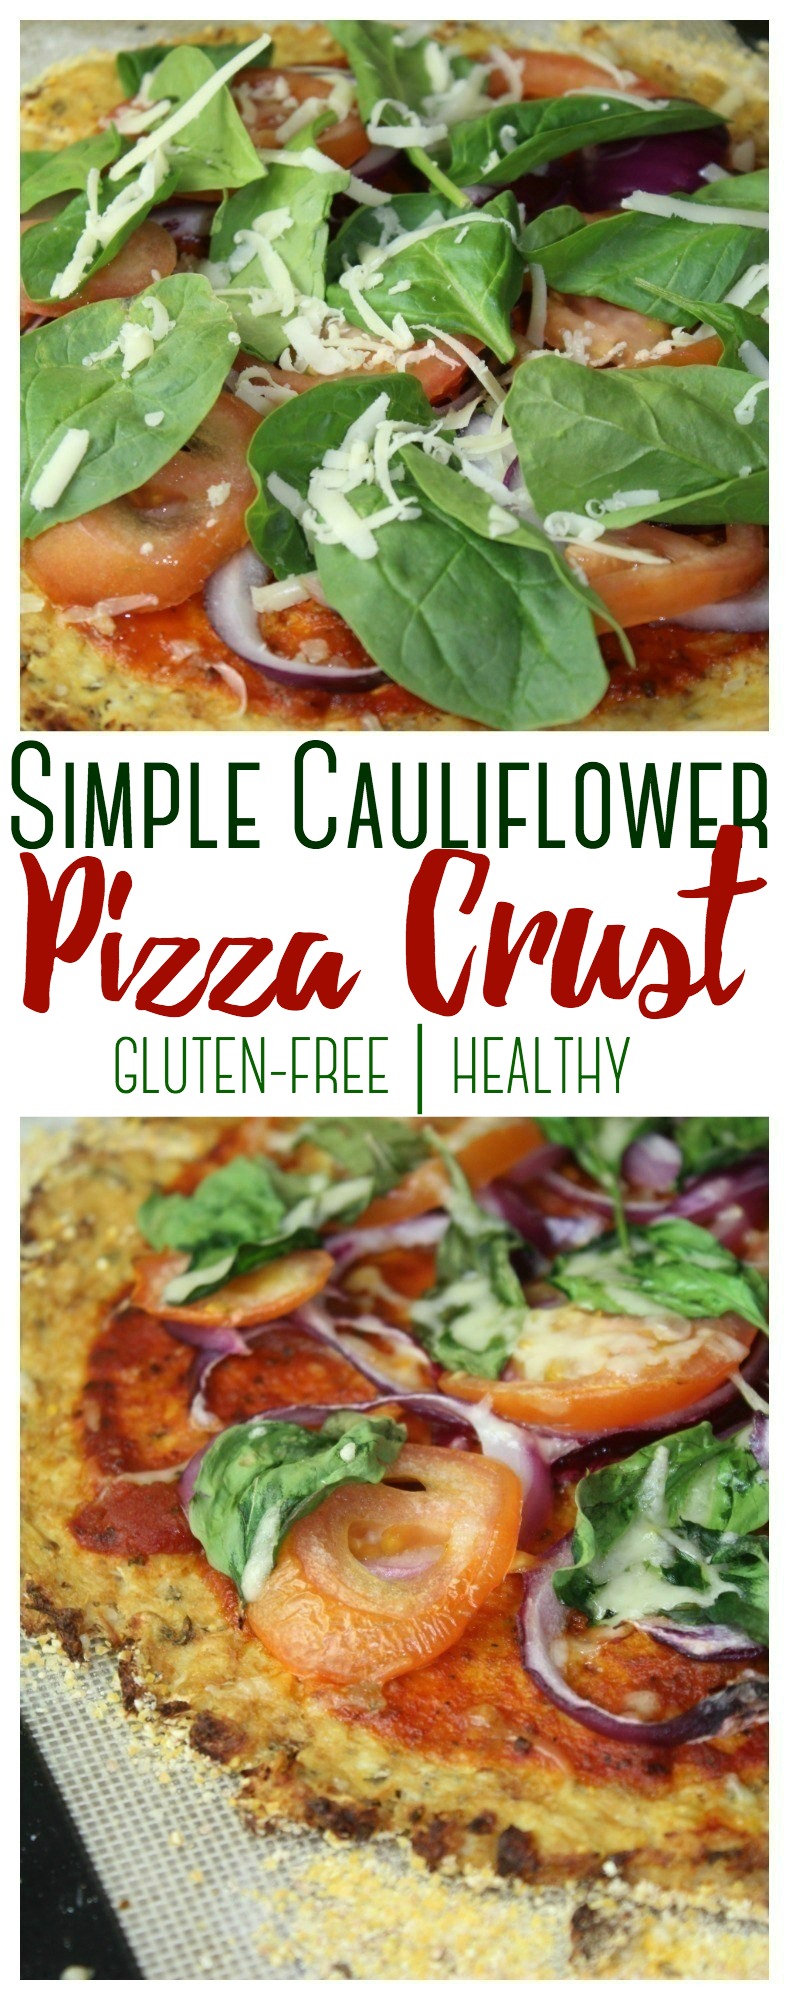 A simple cauliflower pizza crust that contains simple ingredients and easy-to-follow instructions. The finished crust is crispy on the outside and flavorful on the inside.